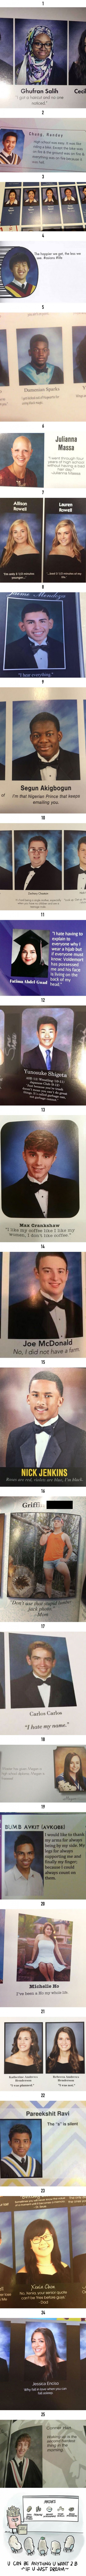 25 Hilarious Yearbook Quotes 